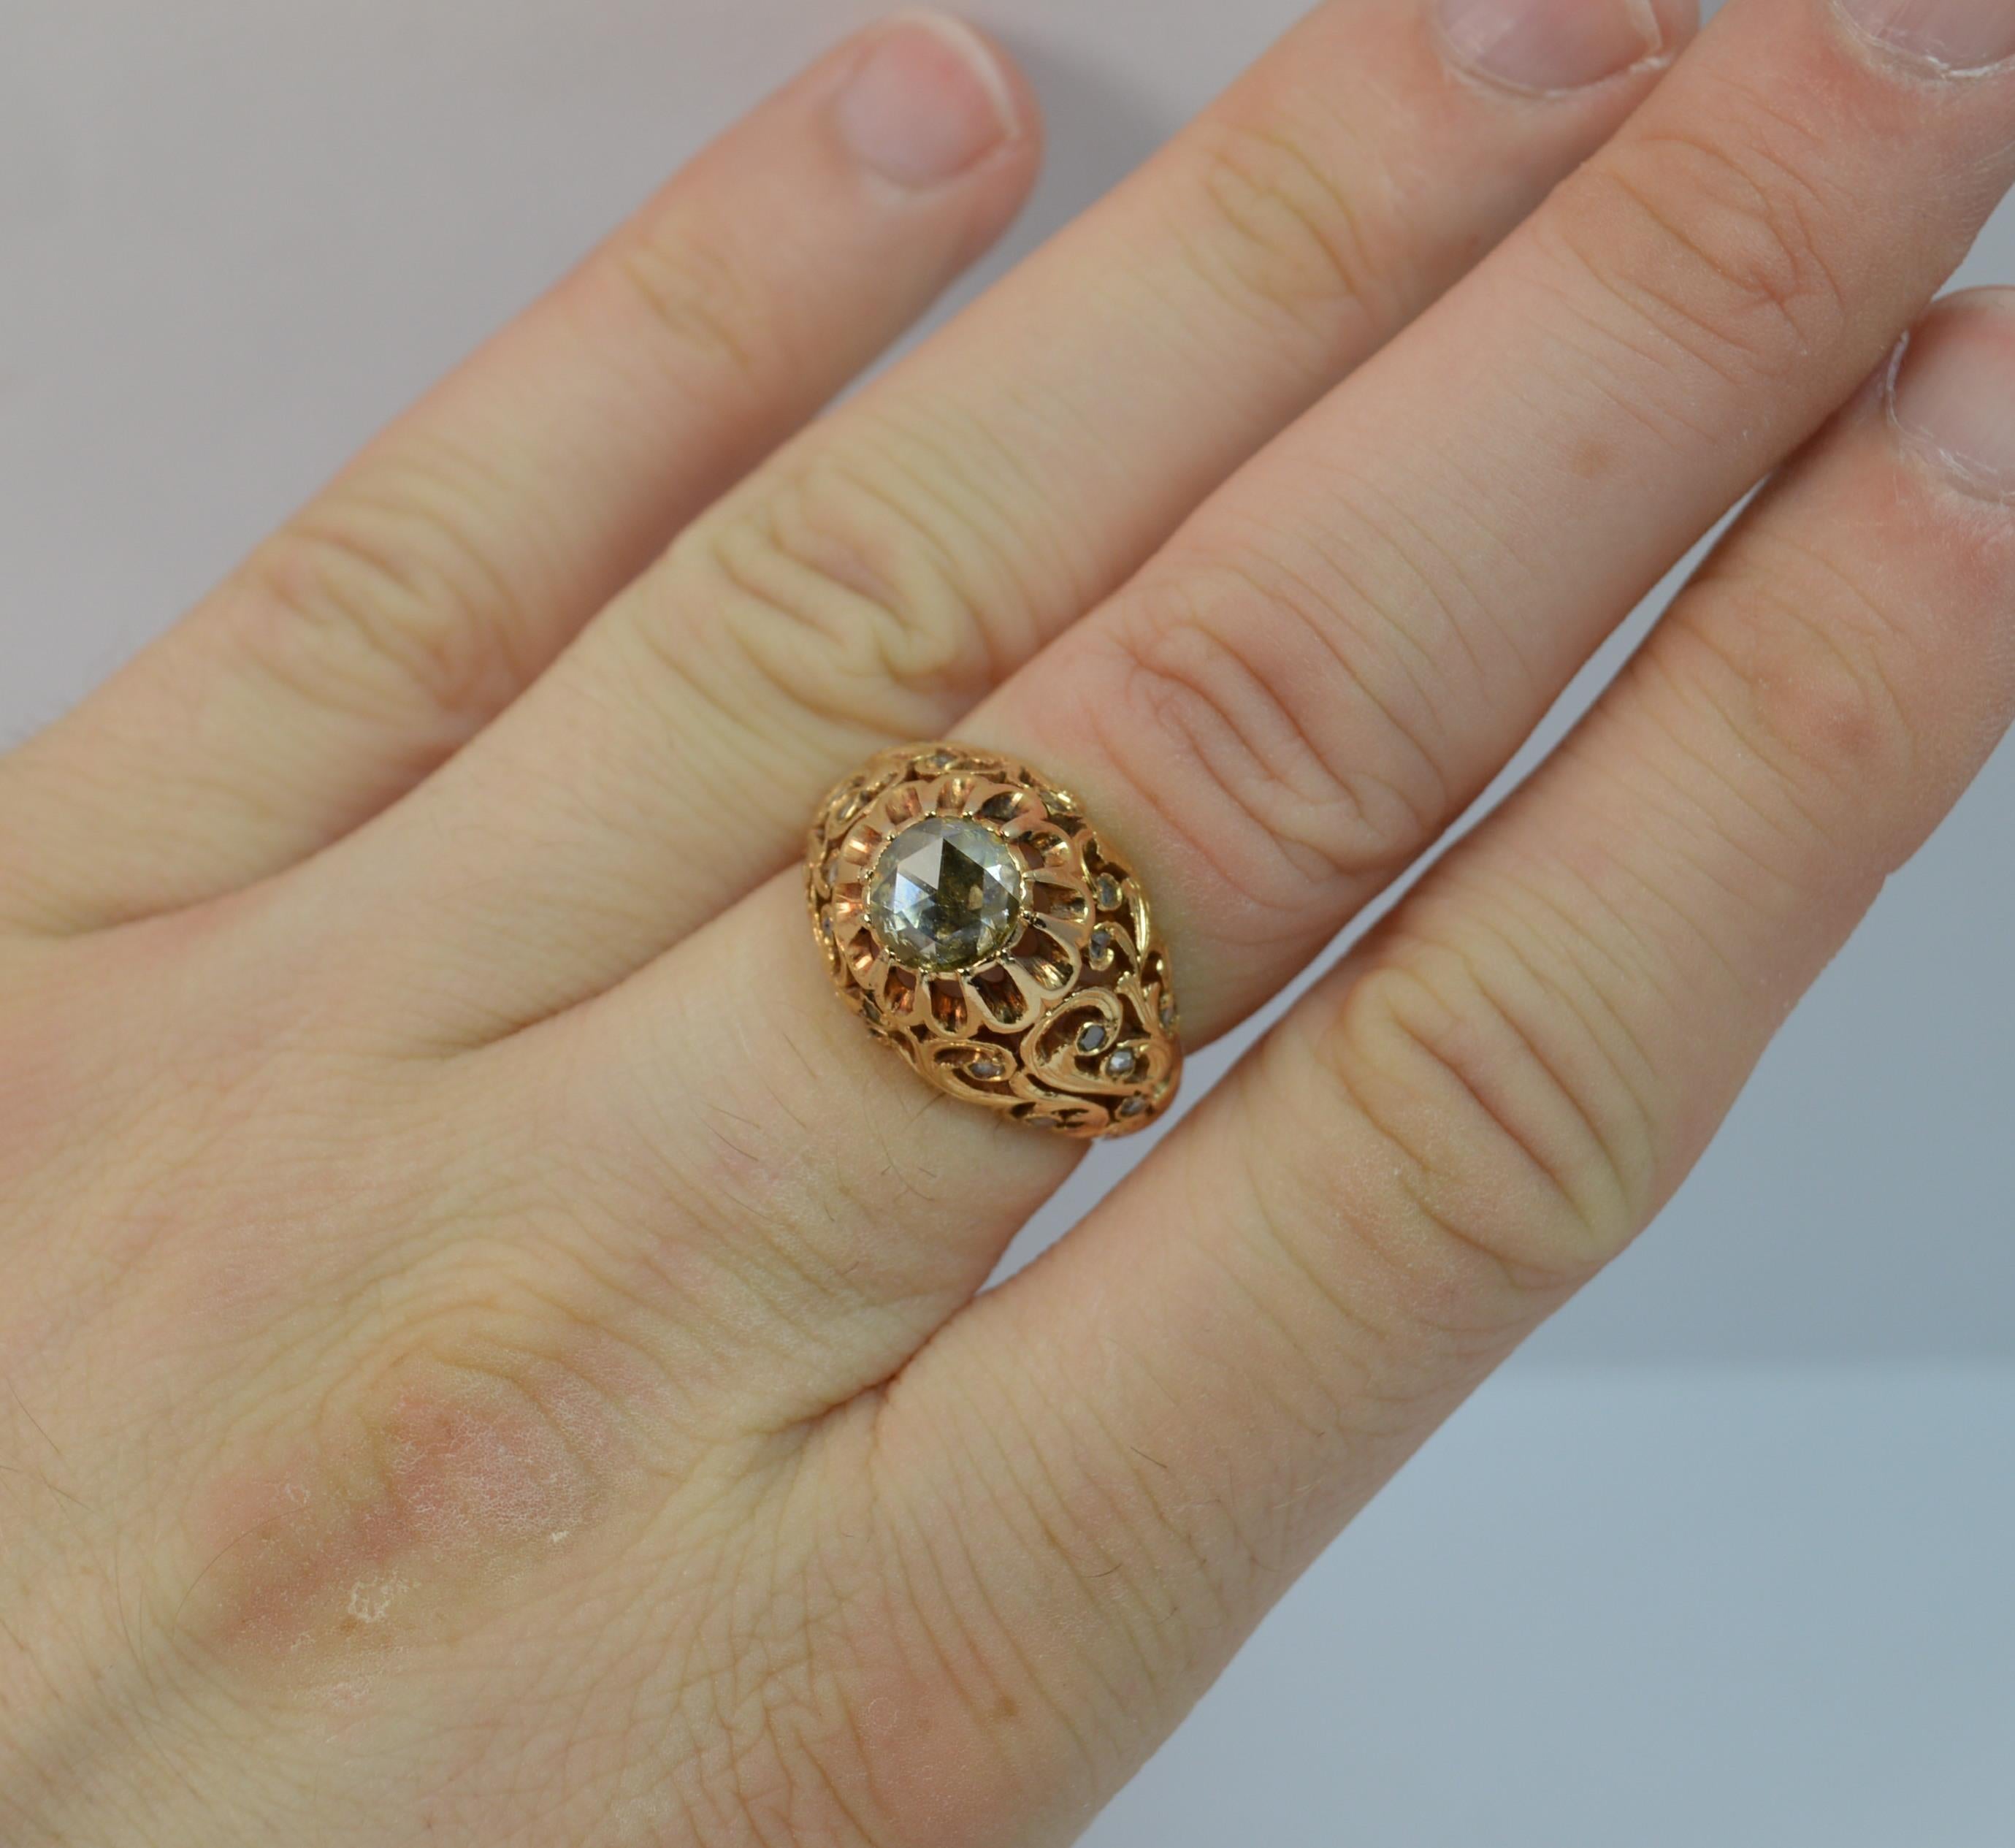 A fantastic Diamond and 18ct Rose Gold ring.
SIZE ; N UK, 6 3/4 US
Designed with a 6.4mm diameter rose cut diamond to the centre in bezel setting. Surrounding is a finely pierced pattern with small rose cut diamond chips throughout.

The centre